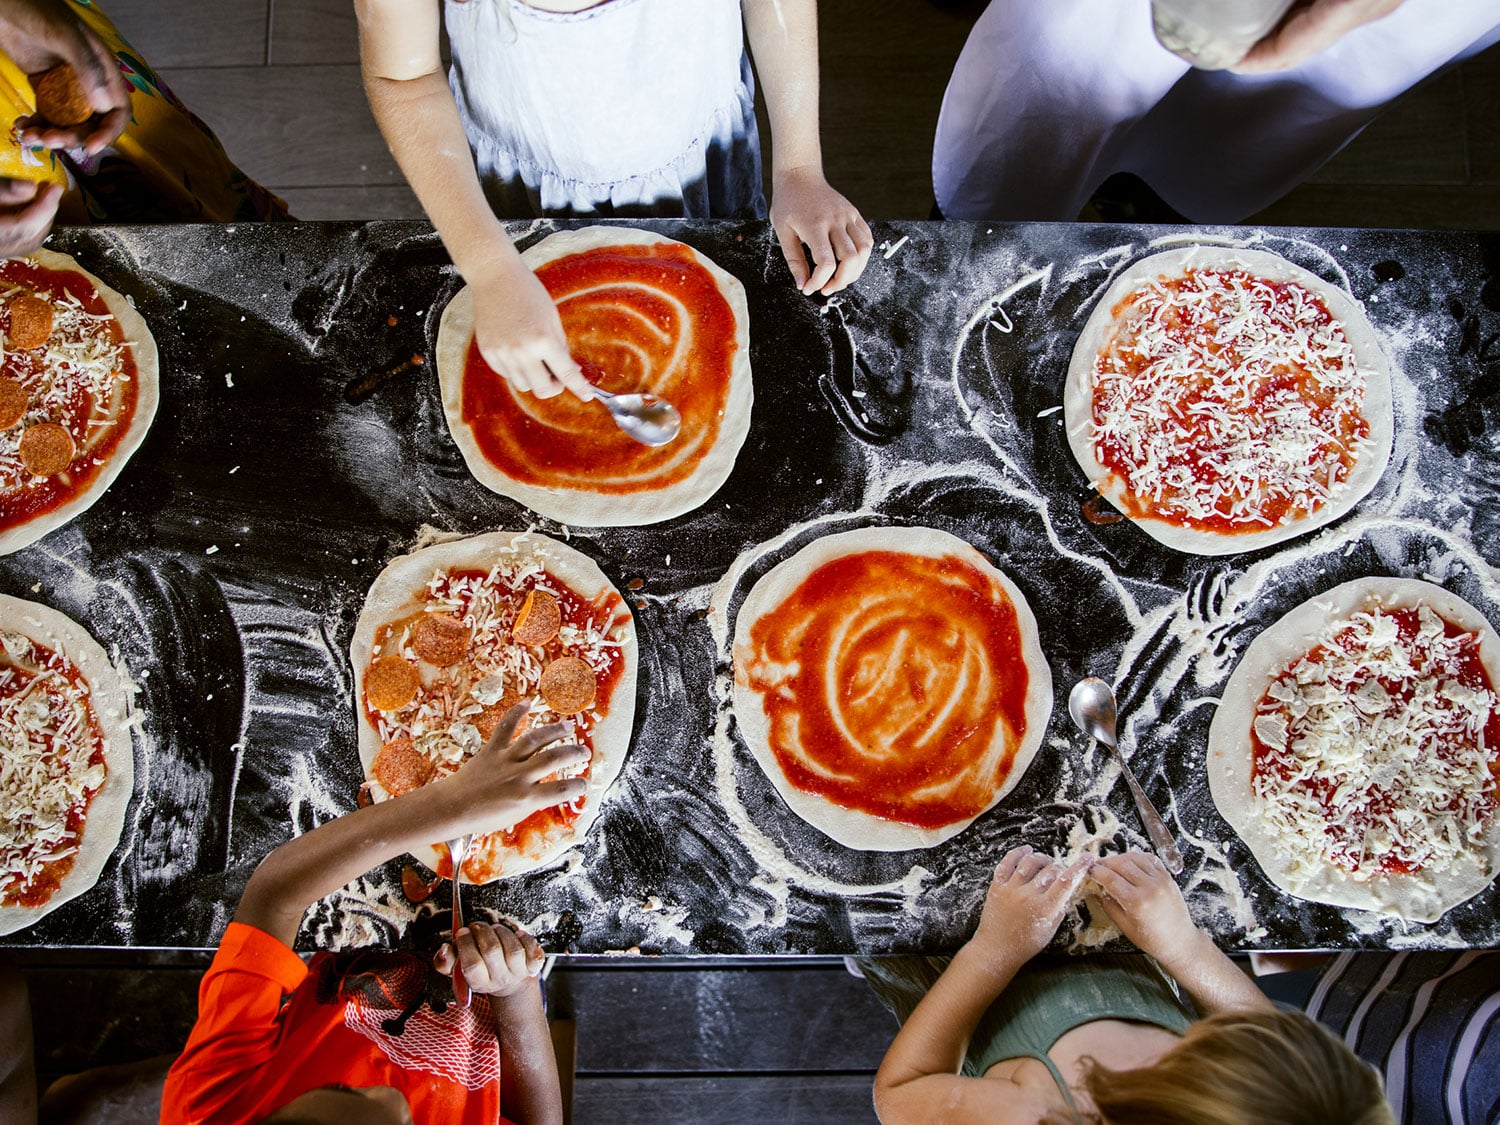 The pizza making class at the Beach Club at Amanyara in Turks and Caicos.